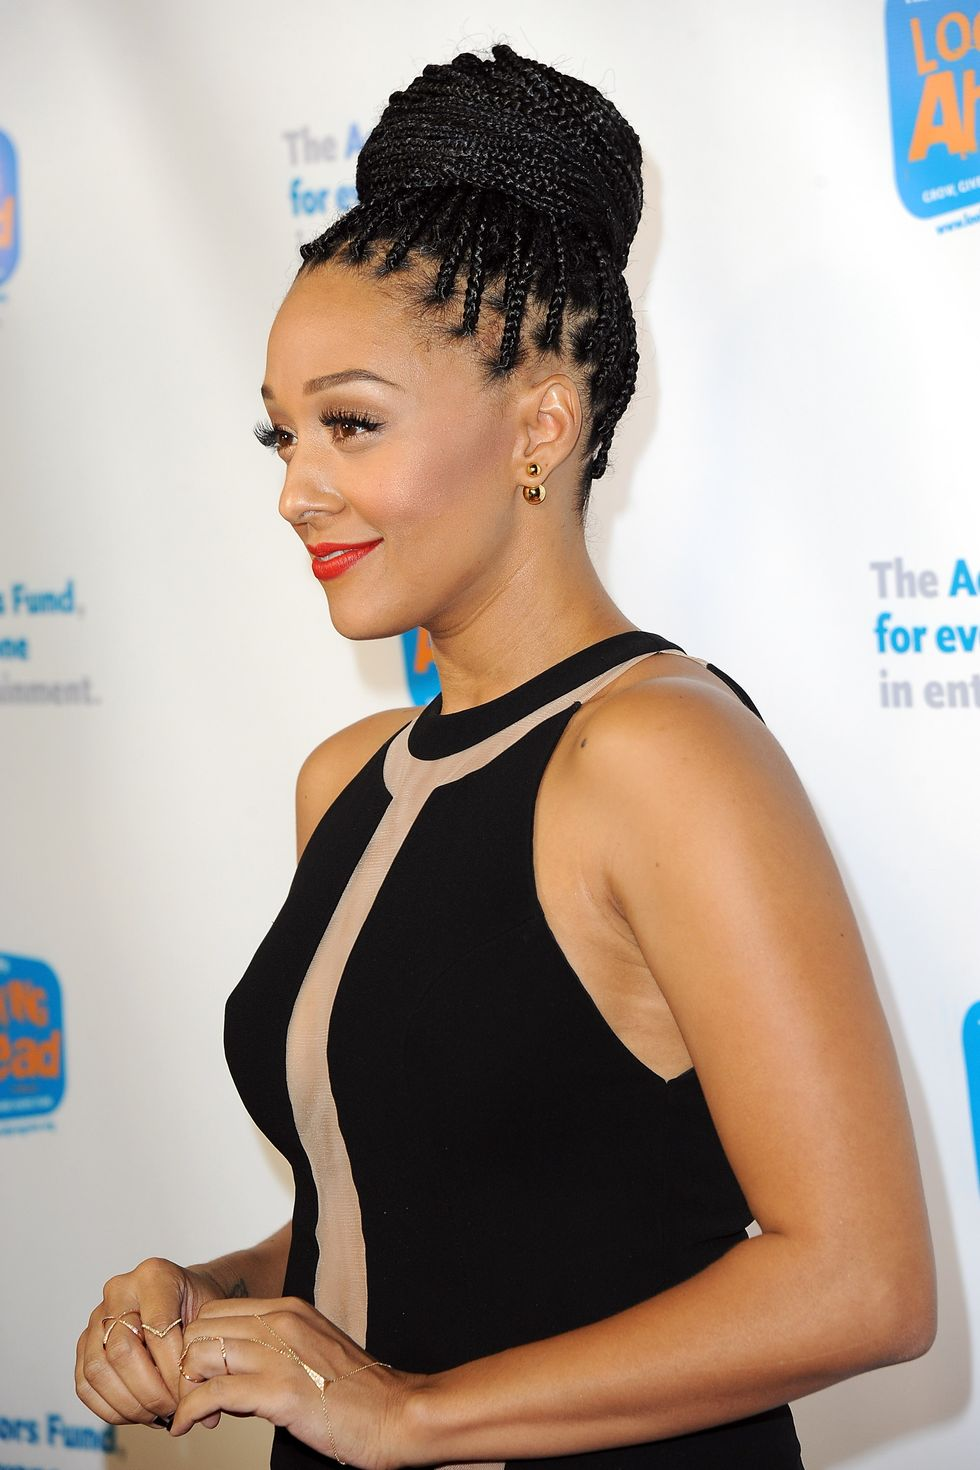 Get an elegant look with top knot bun with braids